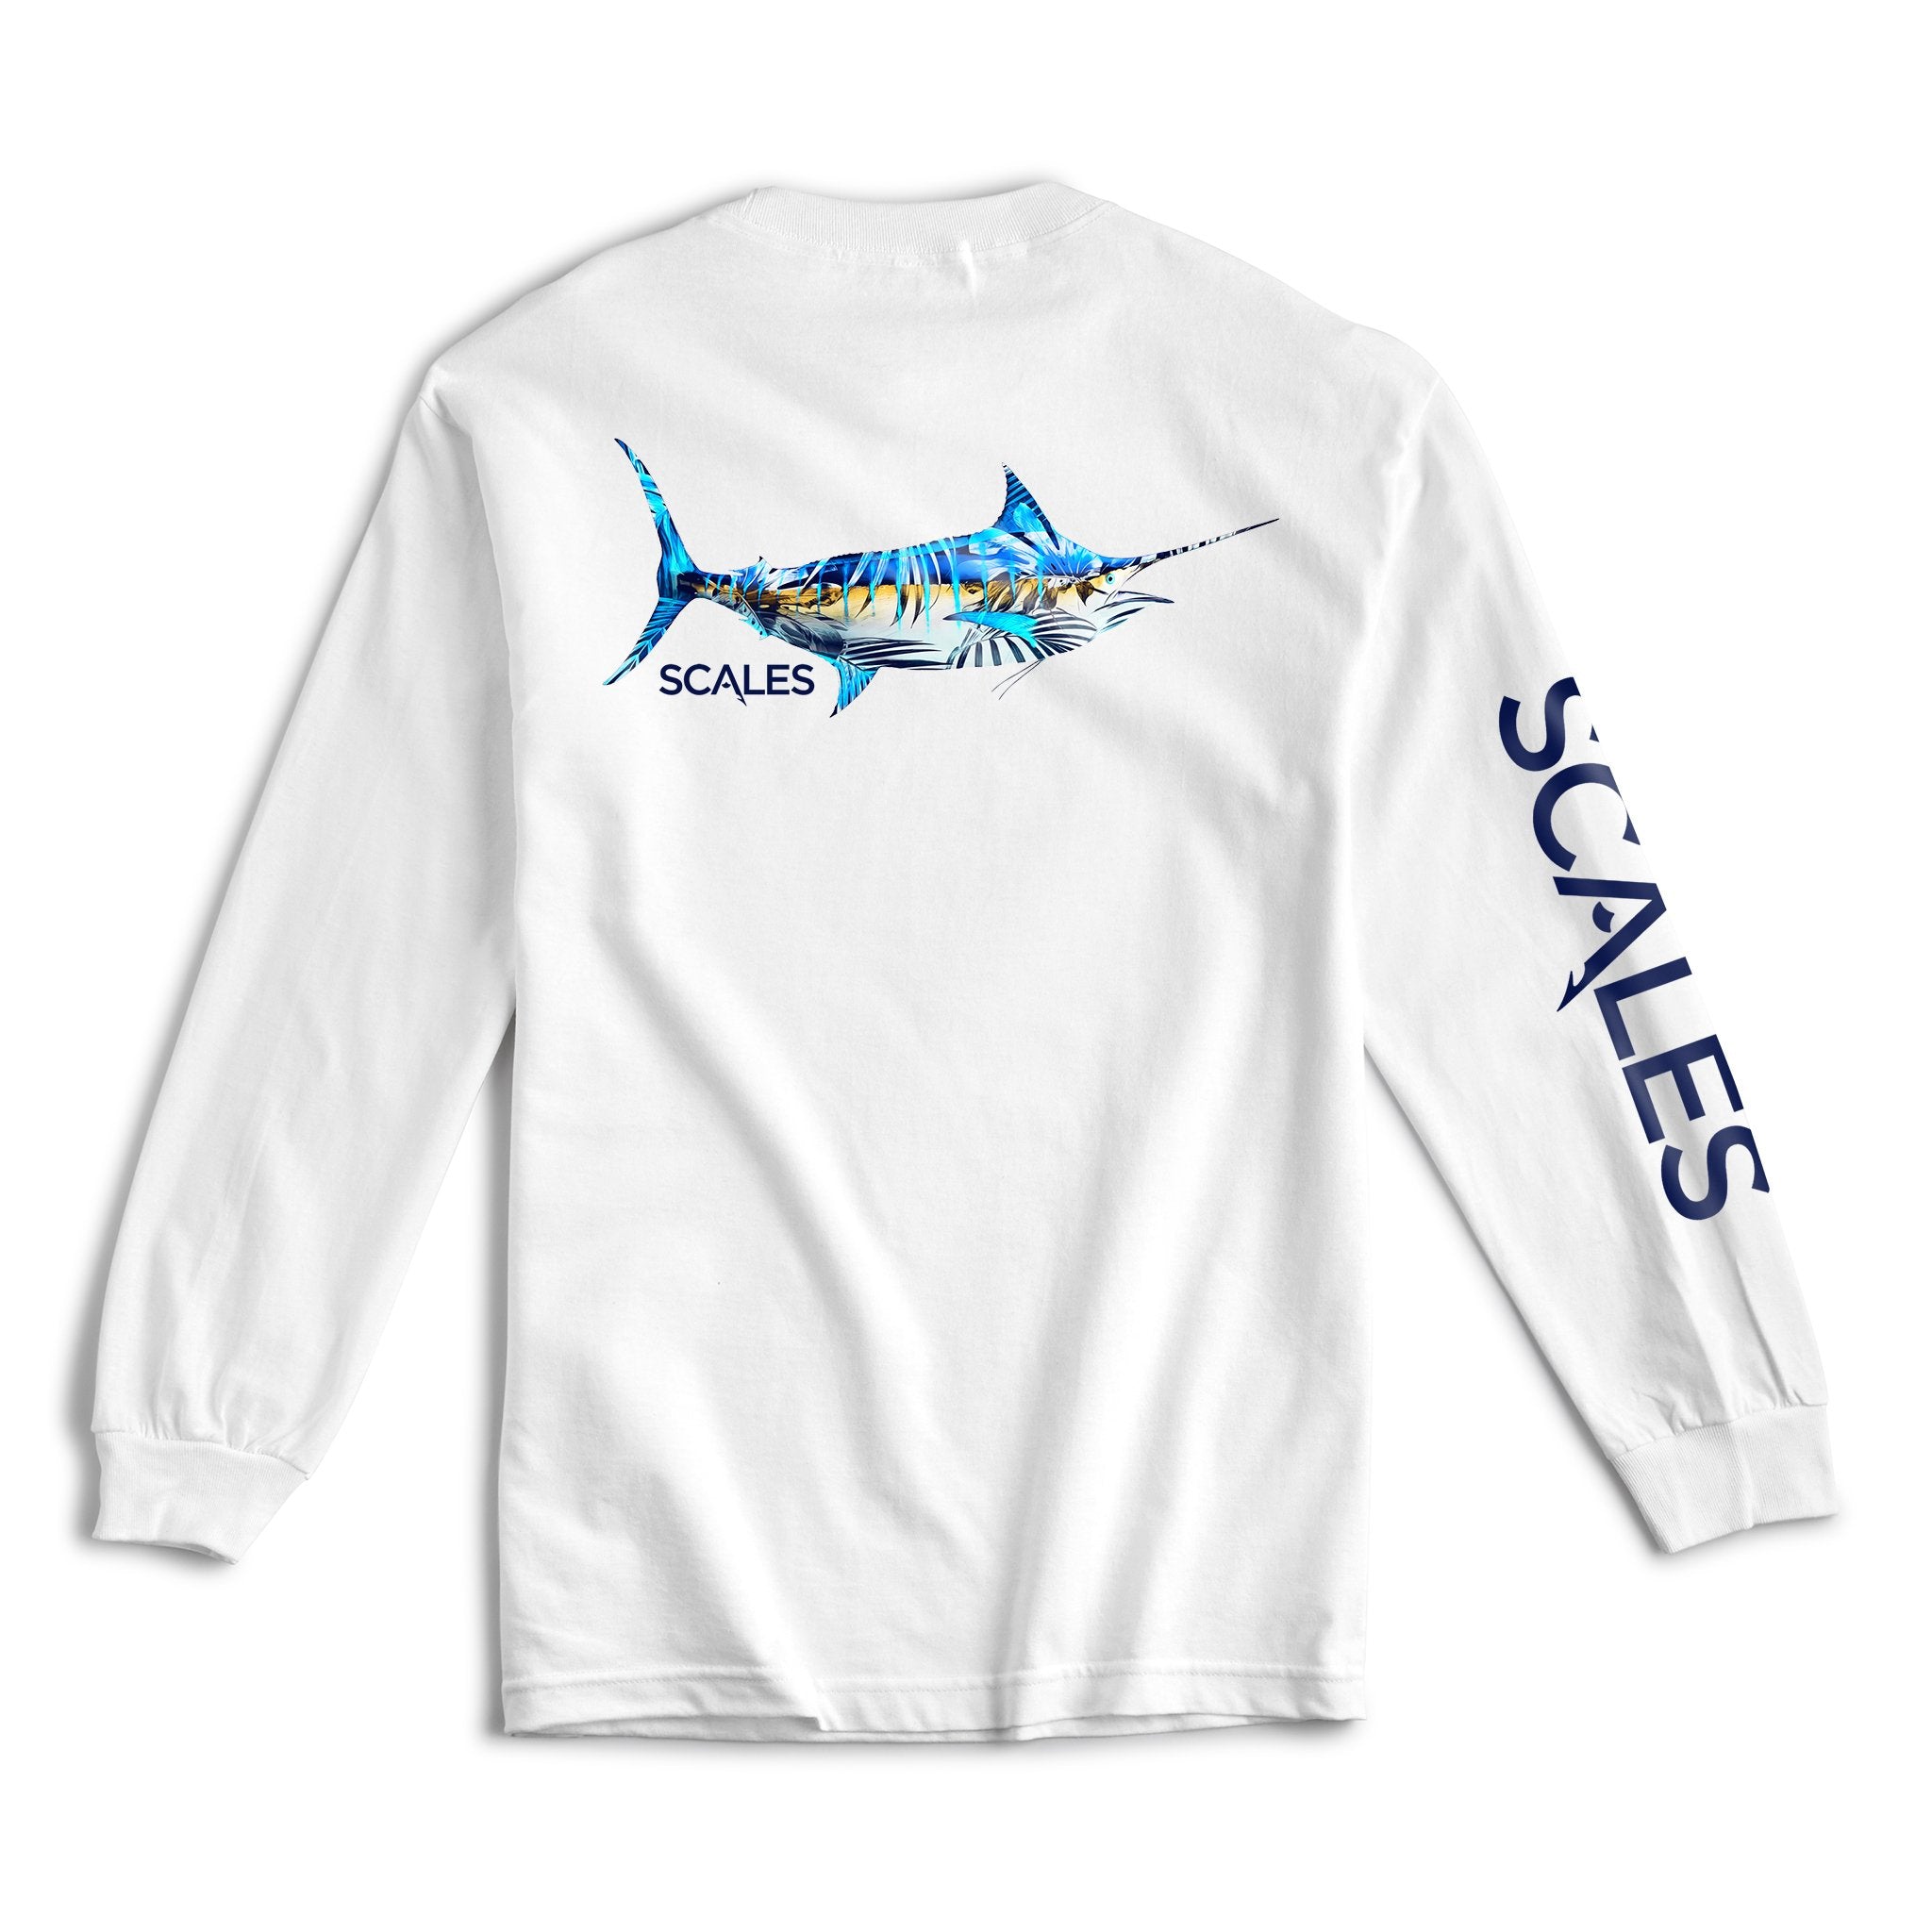 Scales Gear Tropical Marlin Long Sleeve White Shirt - Compleat